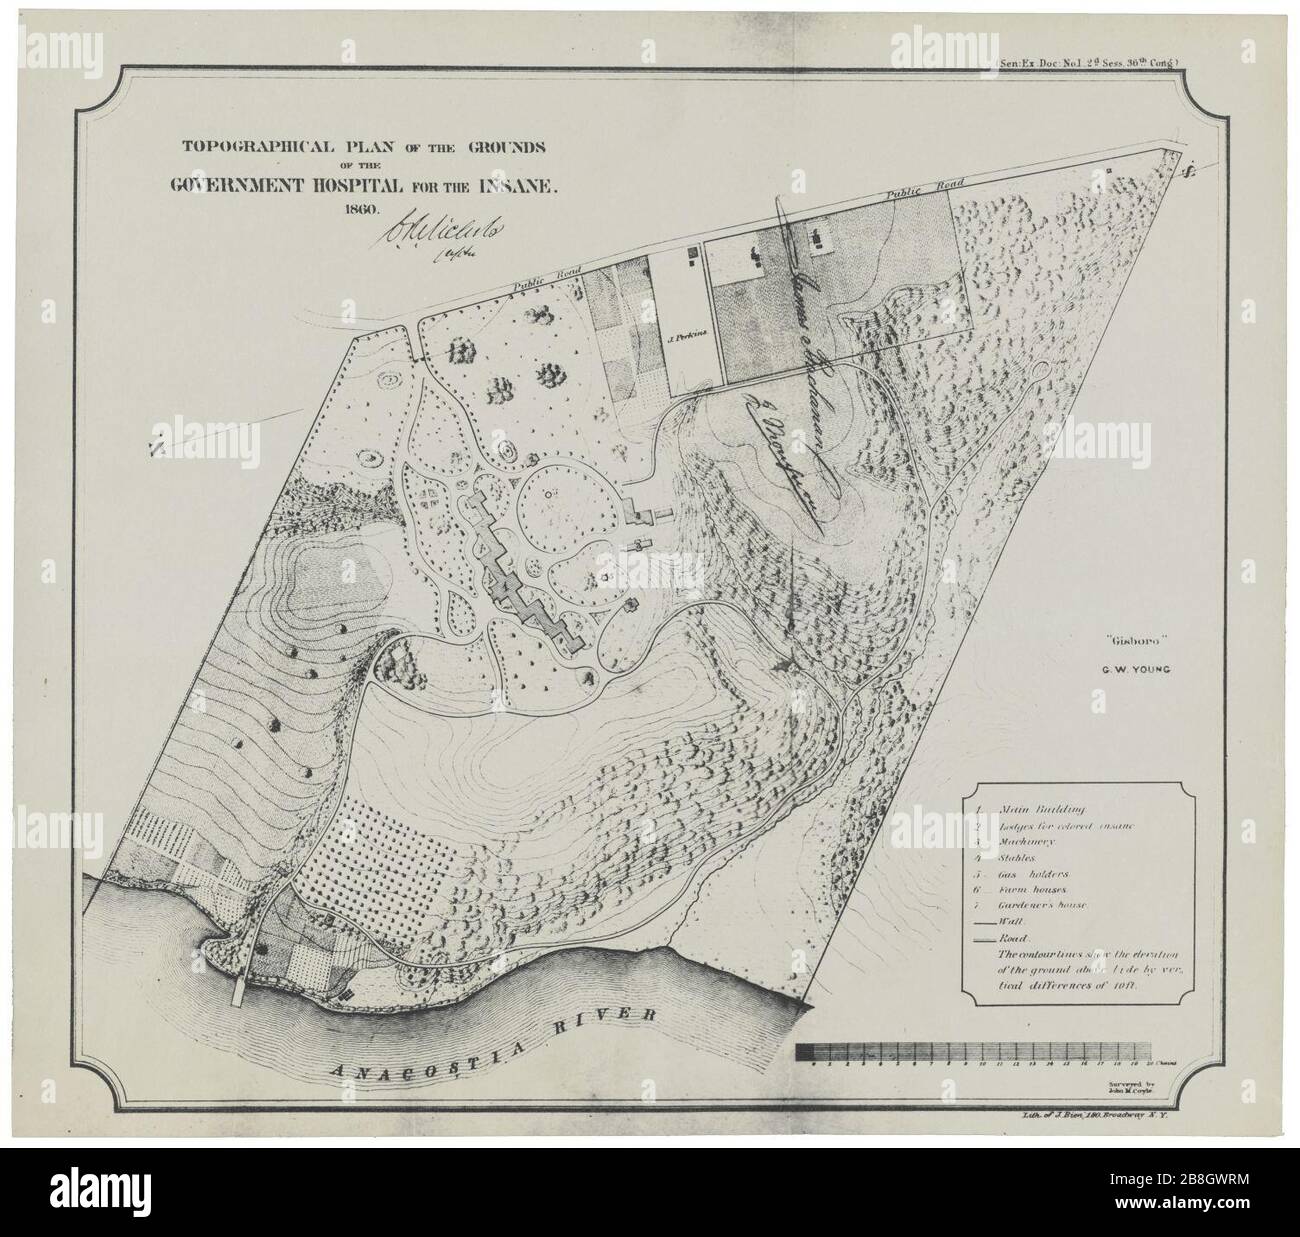 Government Hospital for the Insane (Saint Elizabeths Hospital), Washington, D.C. Topographical plan of the grounds Stock Photo